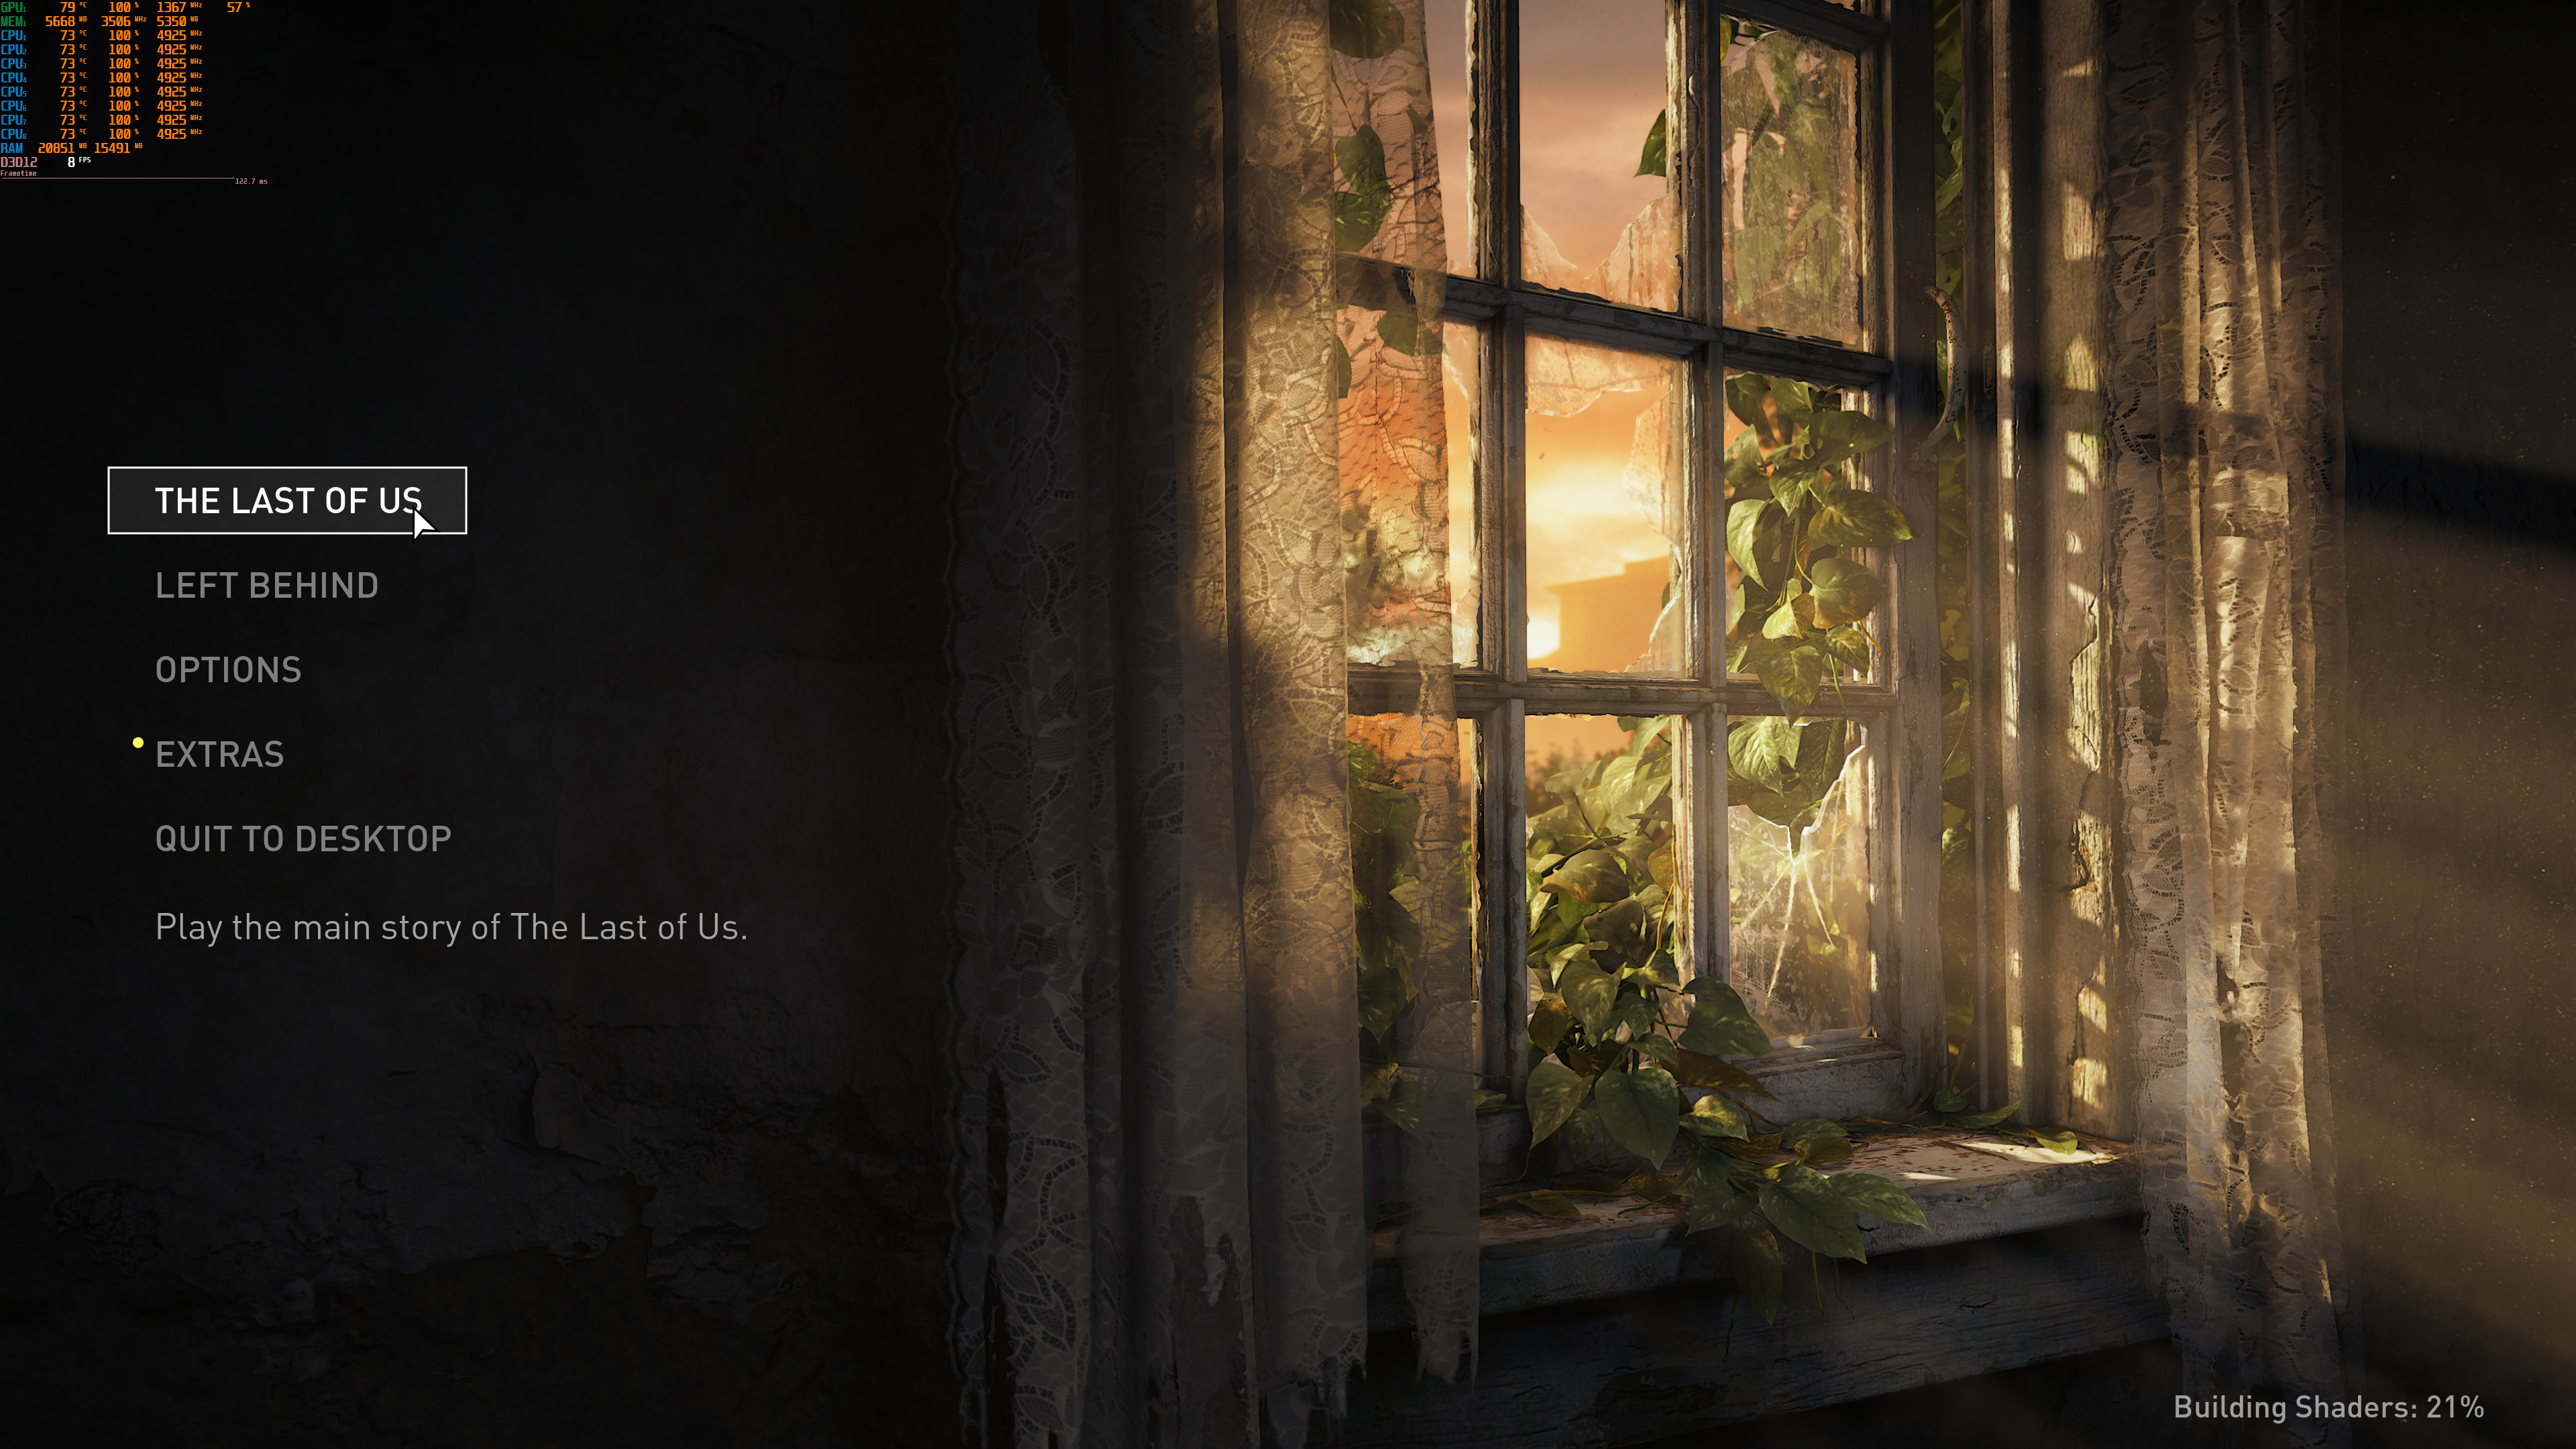 The Last of Us PC first look..27GB RAM USAGE?! 